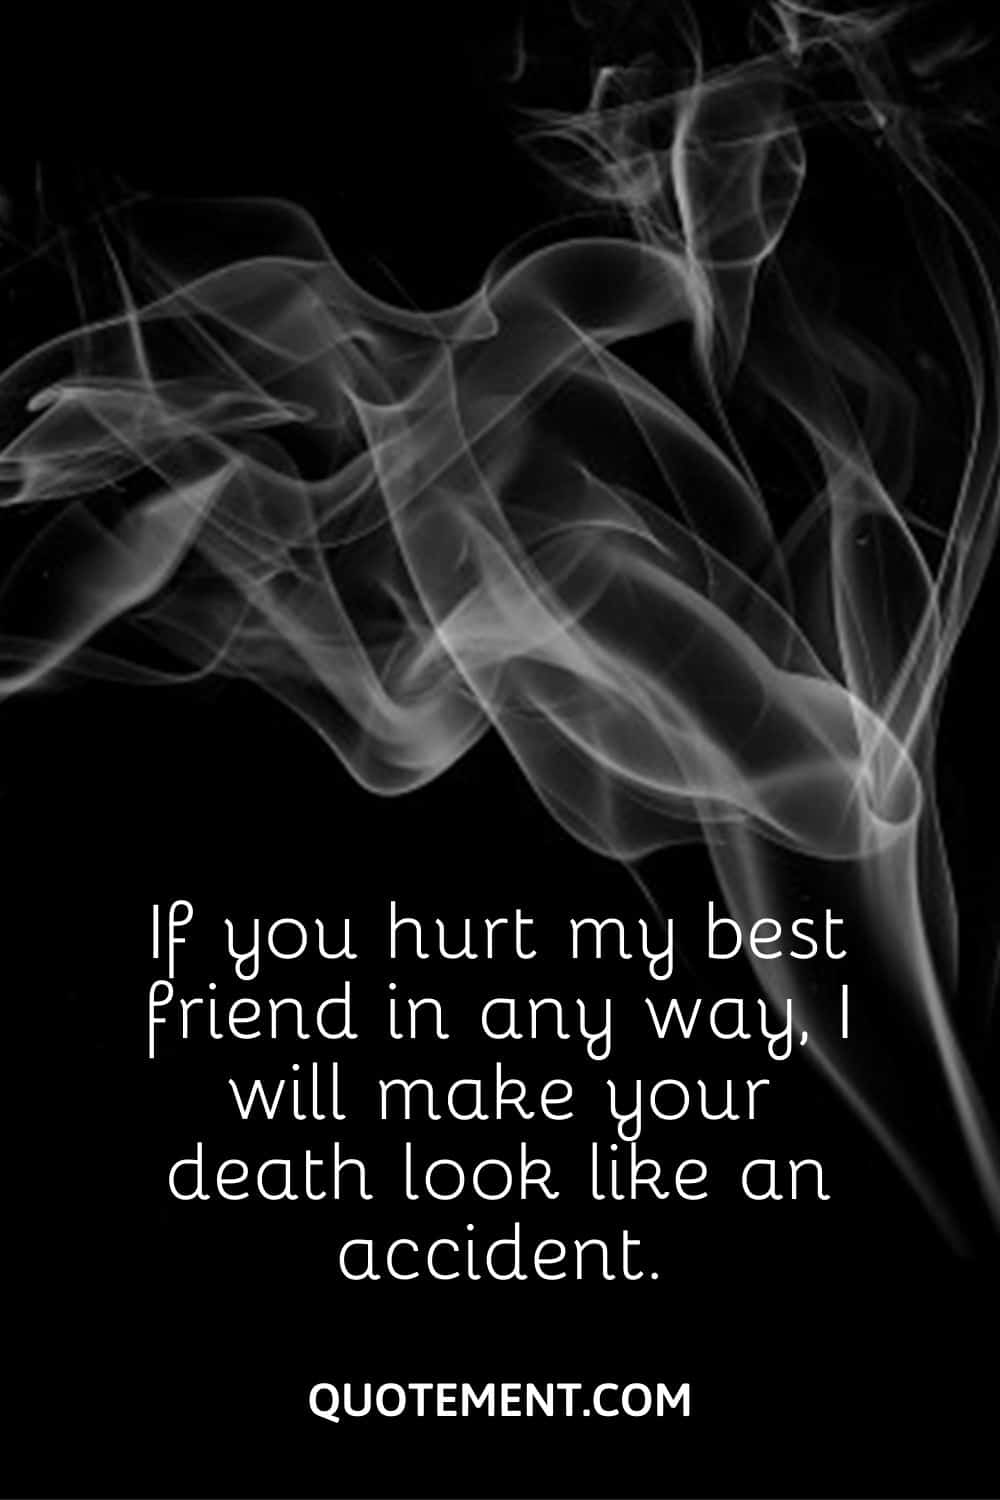 If you hurt my best friend in any way, I will make your death look like an accident.